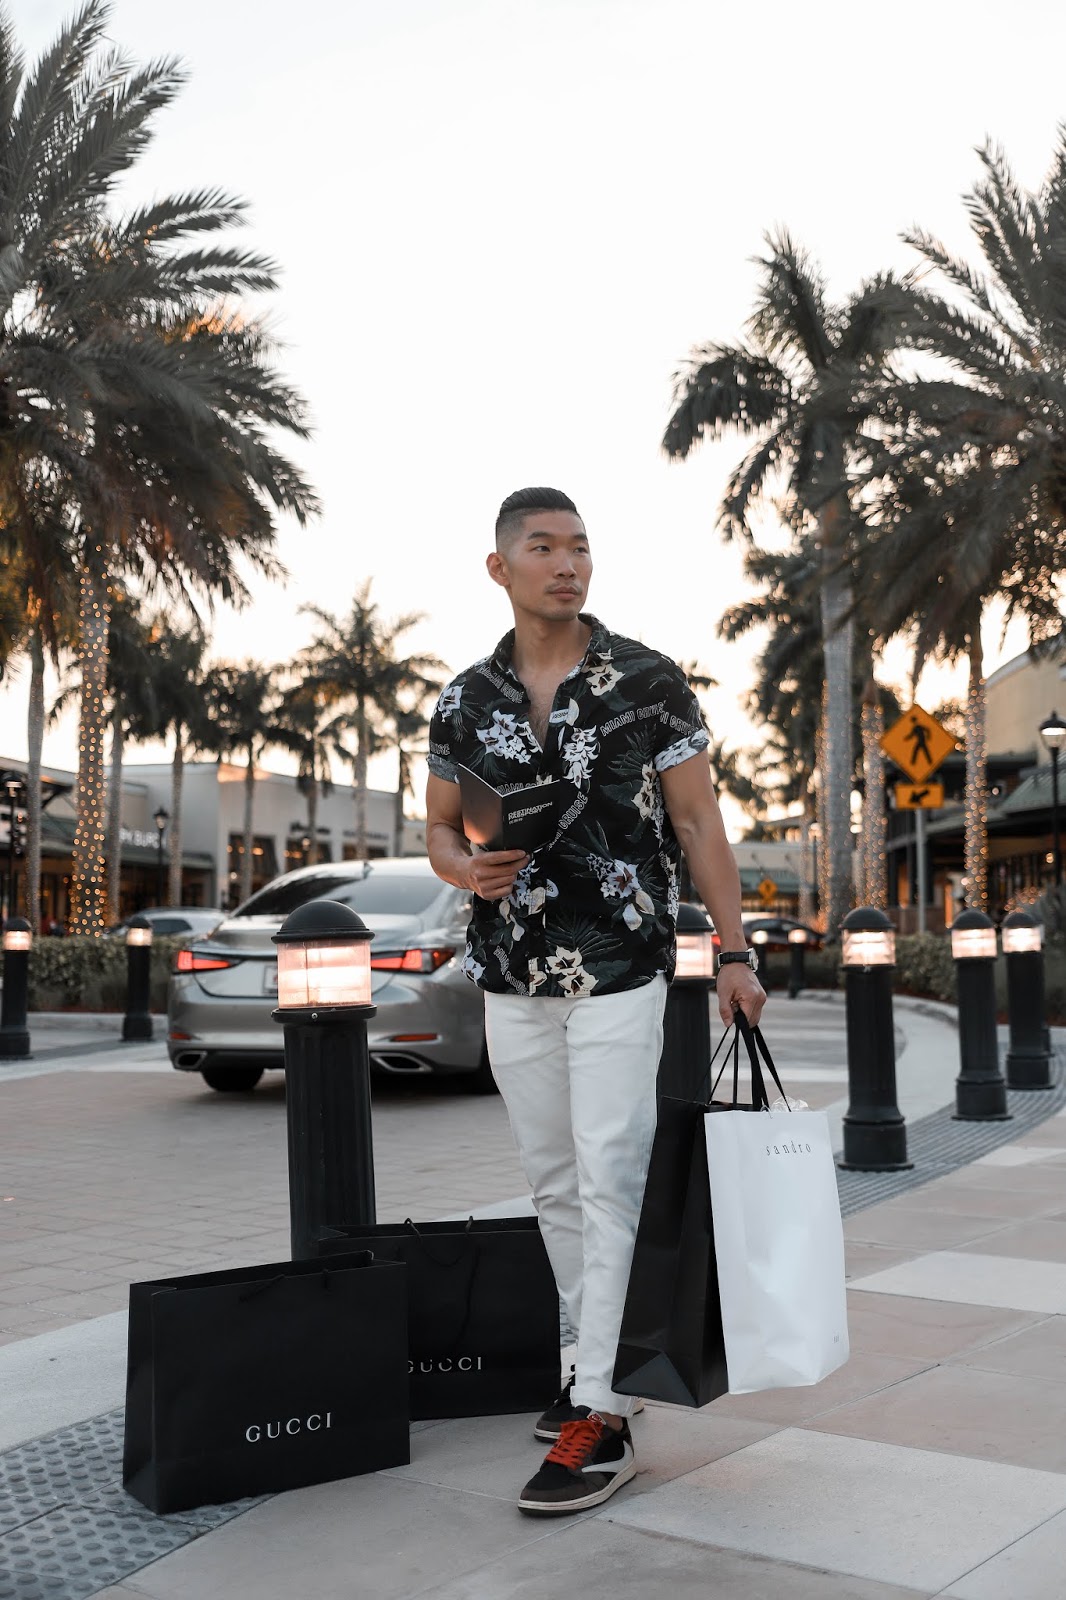 The Colonnade Outlets at Sawgrass Mills Welcomes Three Luxury Brands -  Lifestyle Media